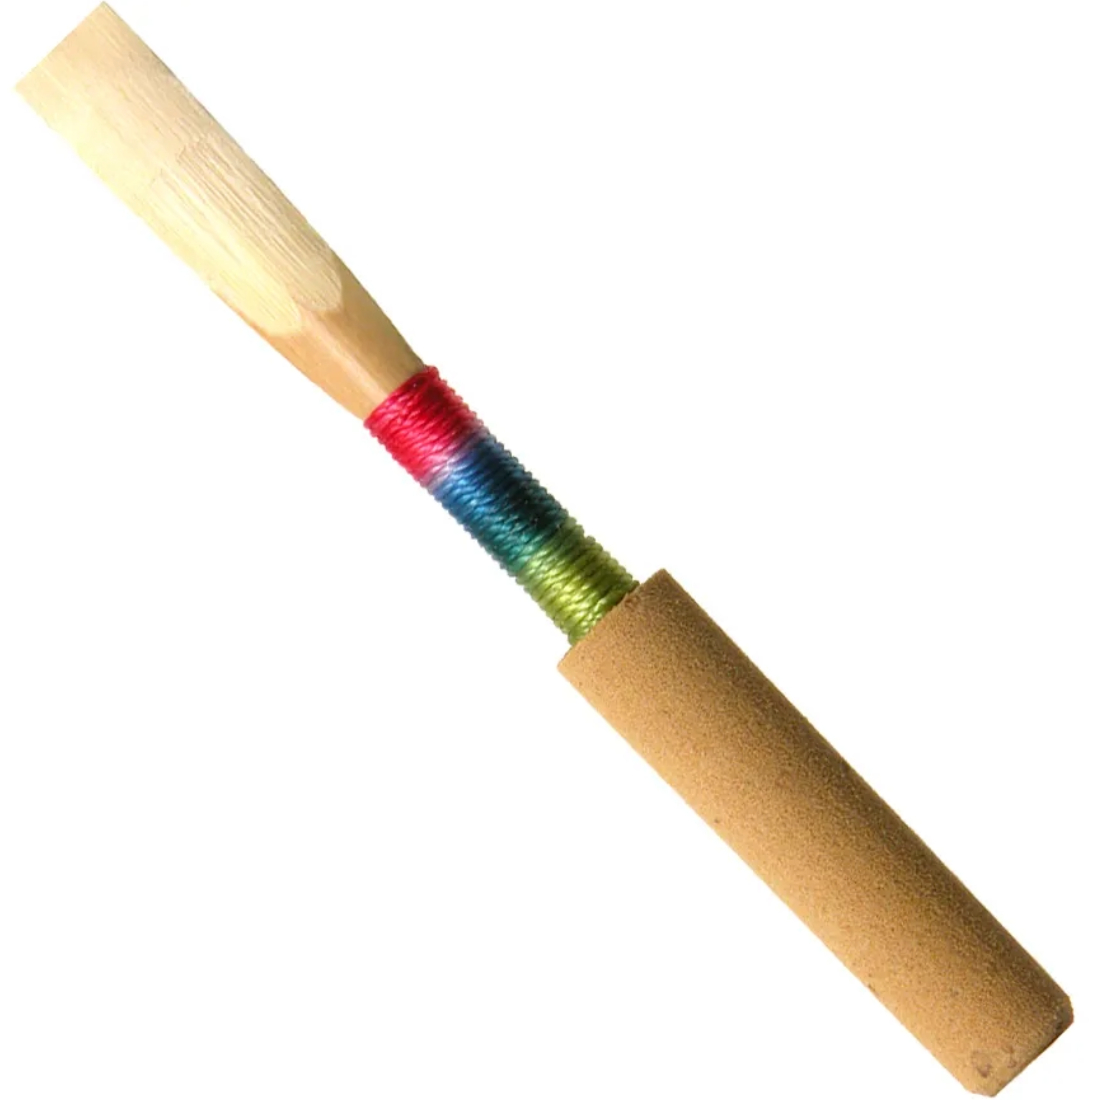 Charles Oboe Reed with red, blue, and green threading